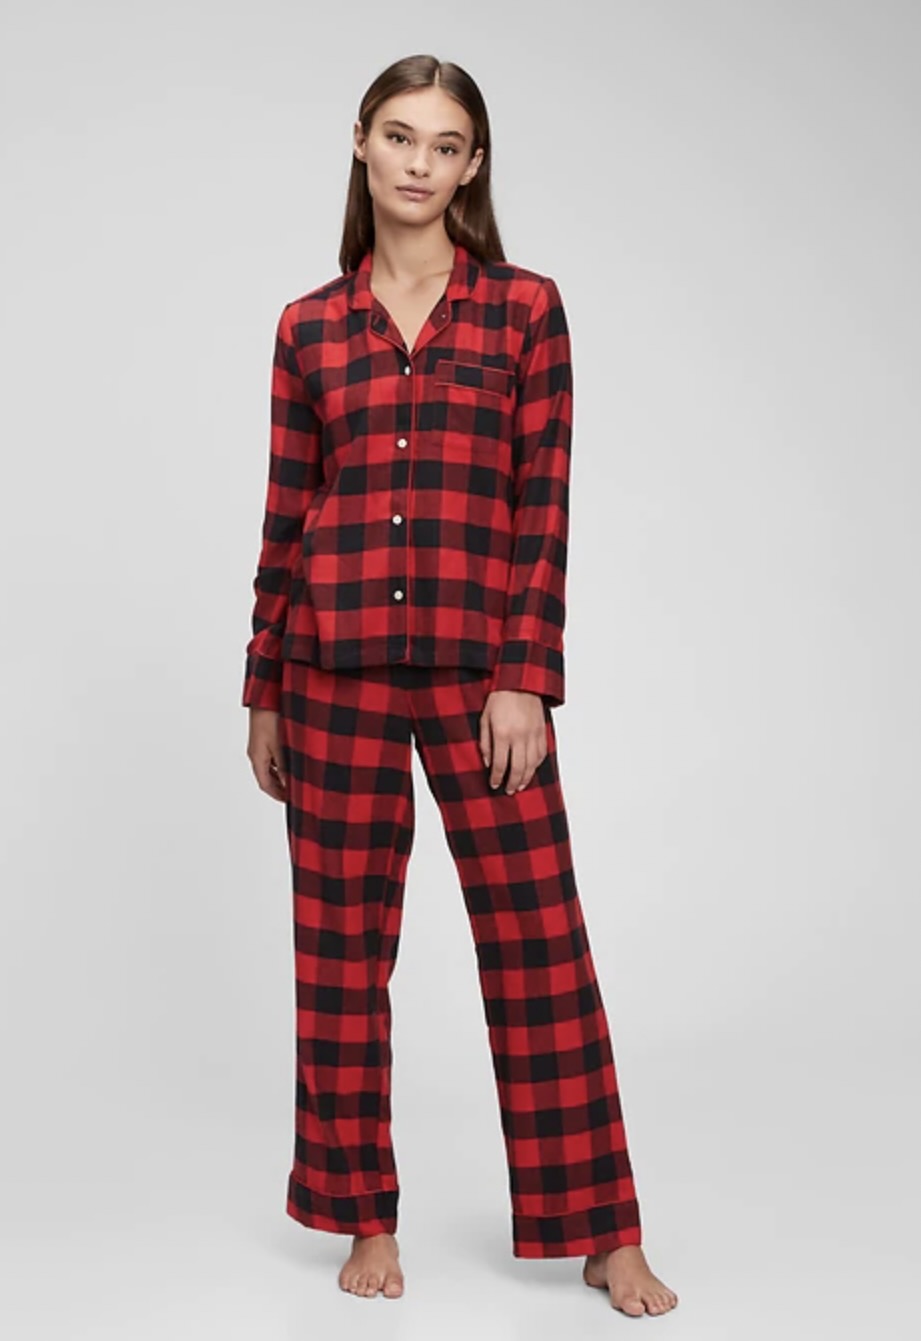 Flannel pajama set from Old Navy